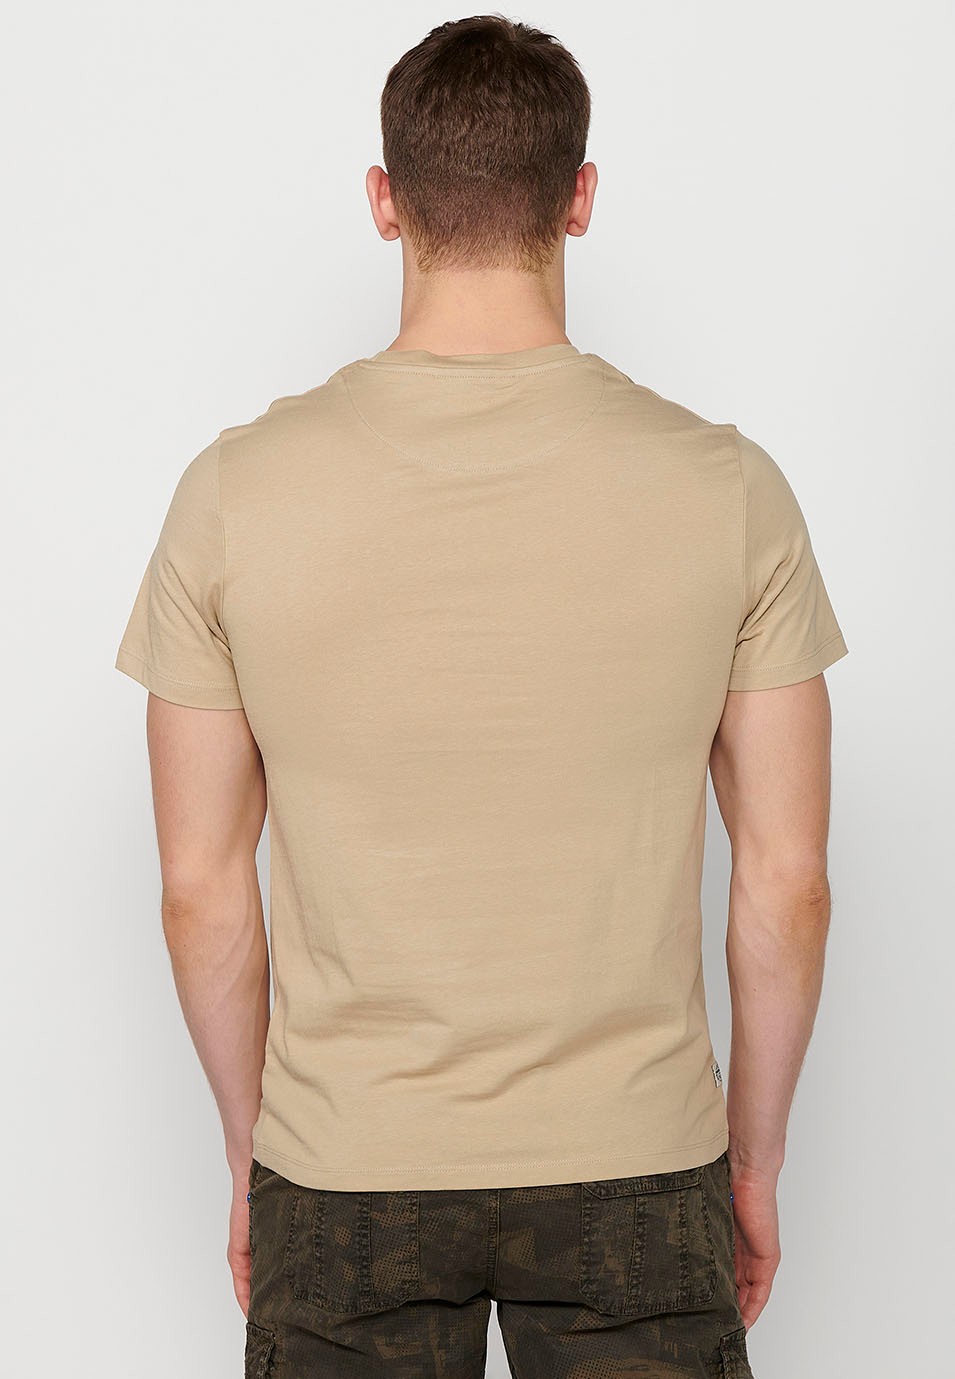 Stone-colored printed cotton short-sleeved t-shirt for men